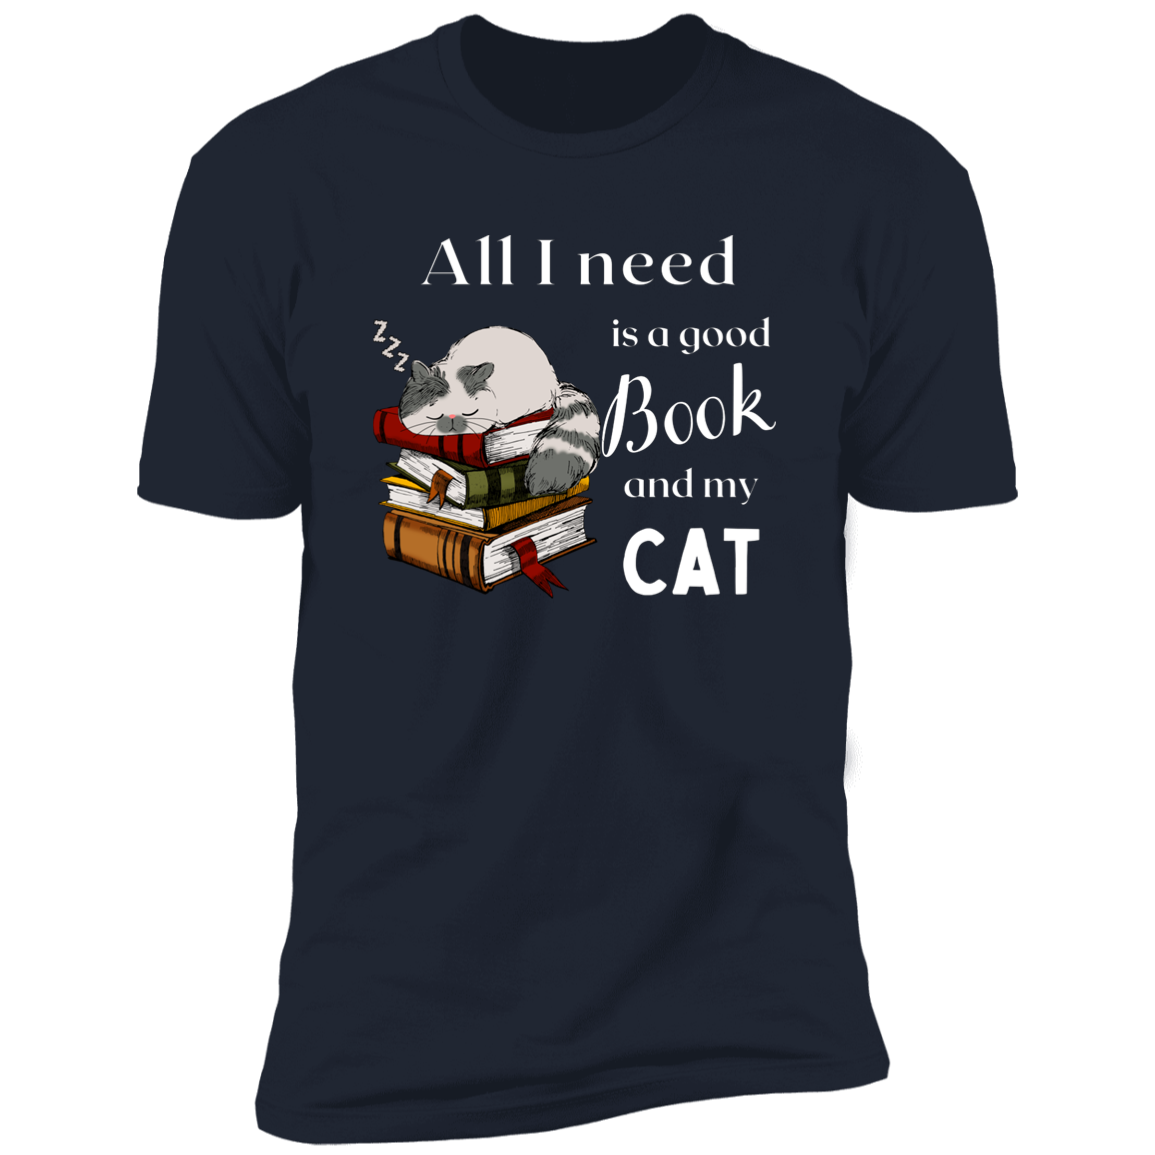 All I Need is a Good Book and My Cat t-shirt for humans, in black